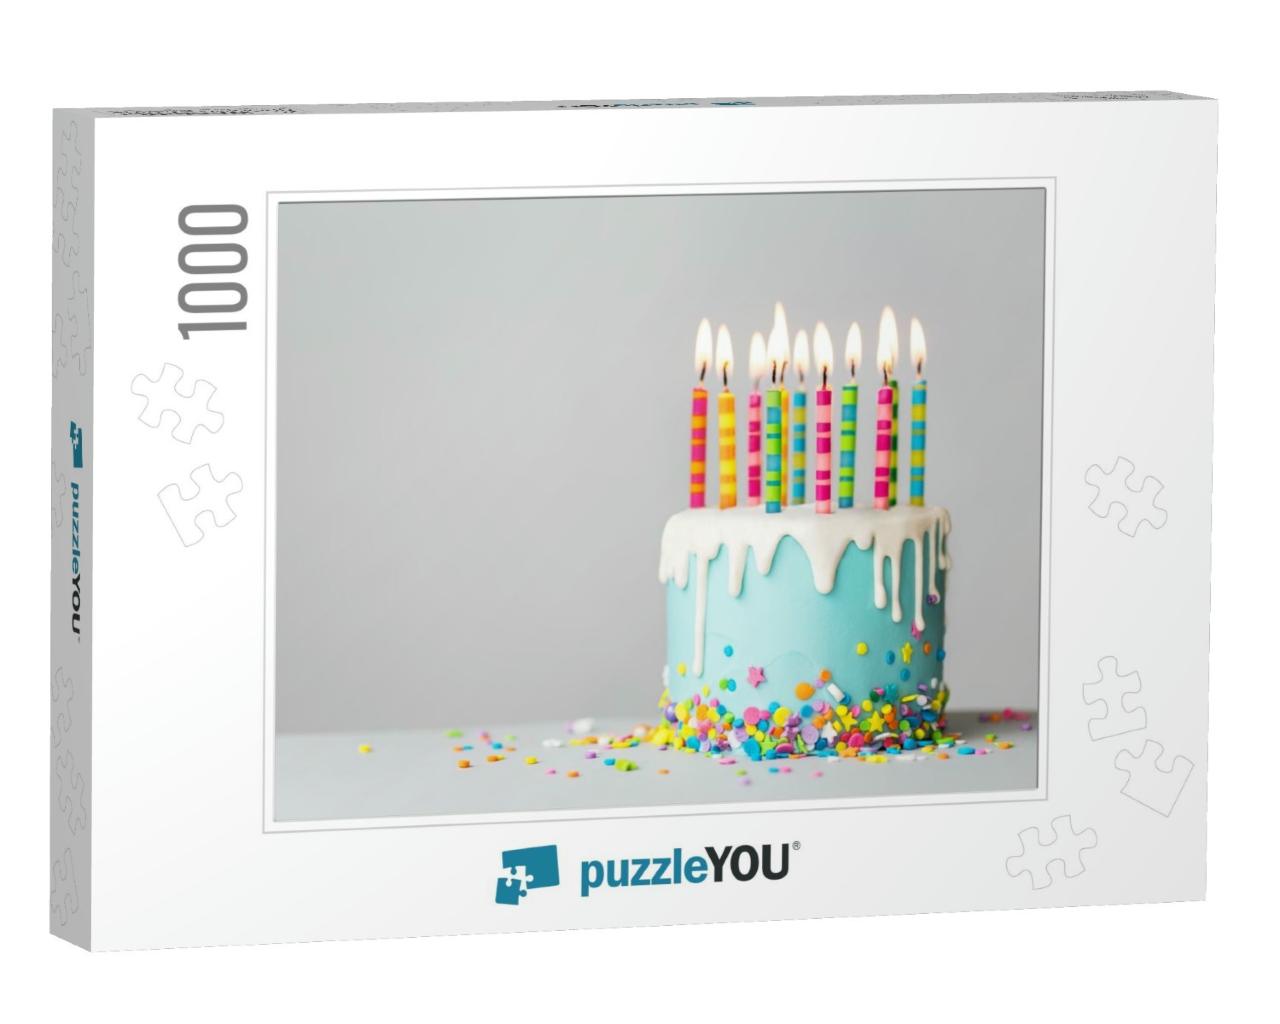 Birthday Cake with White Drip Icing, Sprinkles & Colorful... Jigsaw Puzzle with 1000 pieces